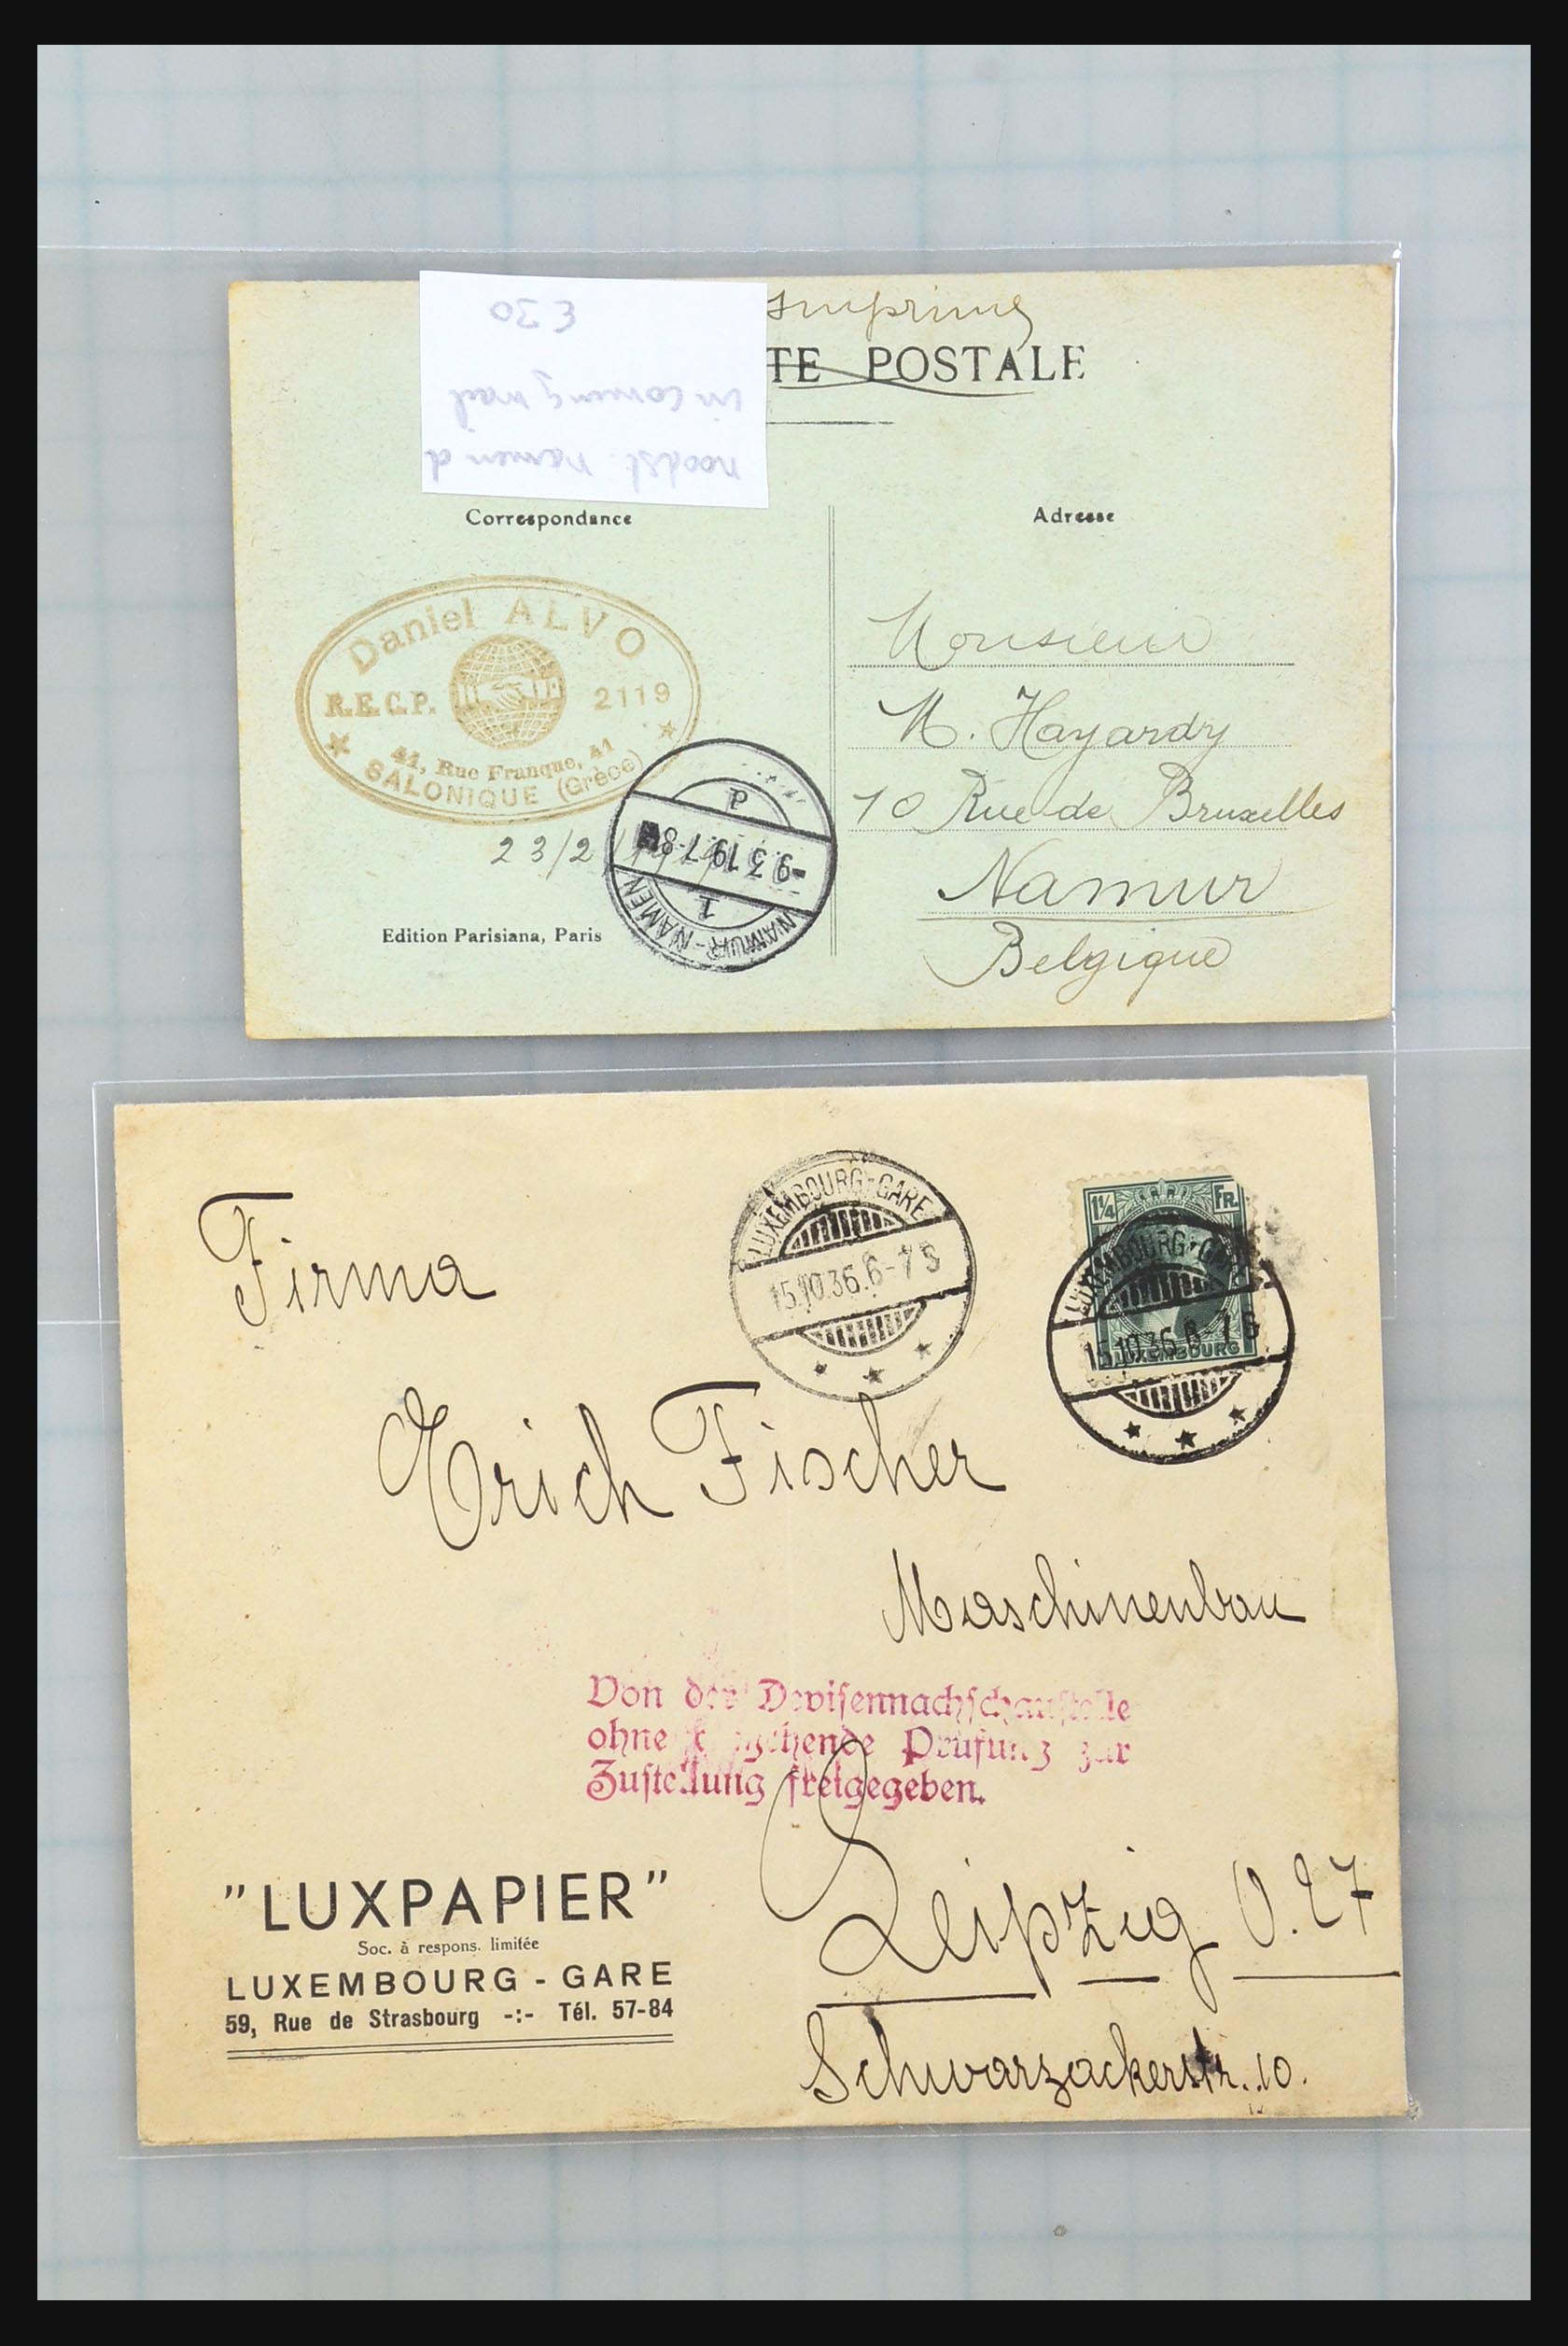 31358 041 - 31358 Portugal/Luxemburg/Greece covers 1880-1960.